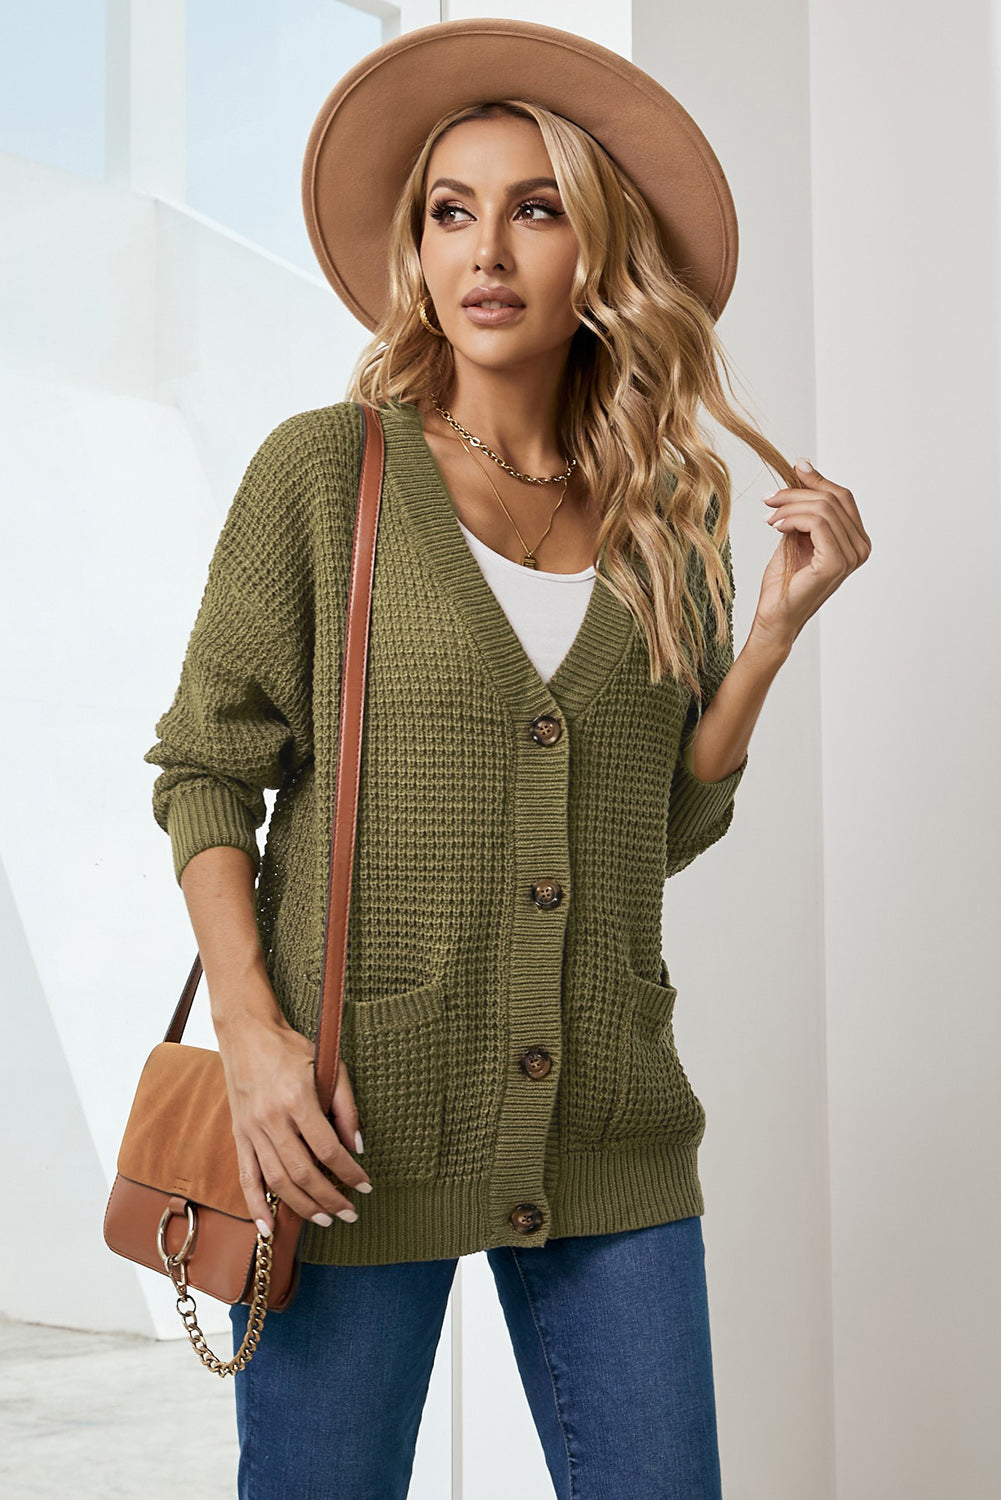 Cozy Chic Button Down Cardigan - Women’s Clothing & Accessories - Shirts & Tops - 6 - 2024